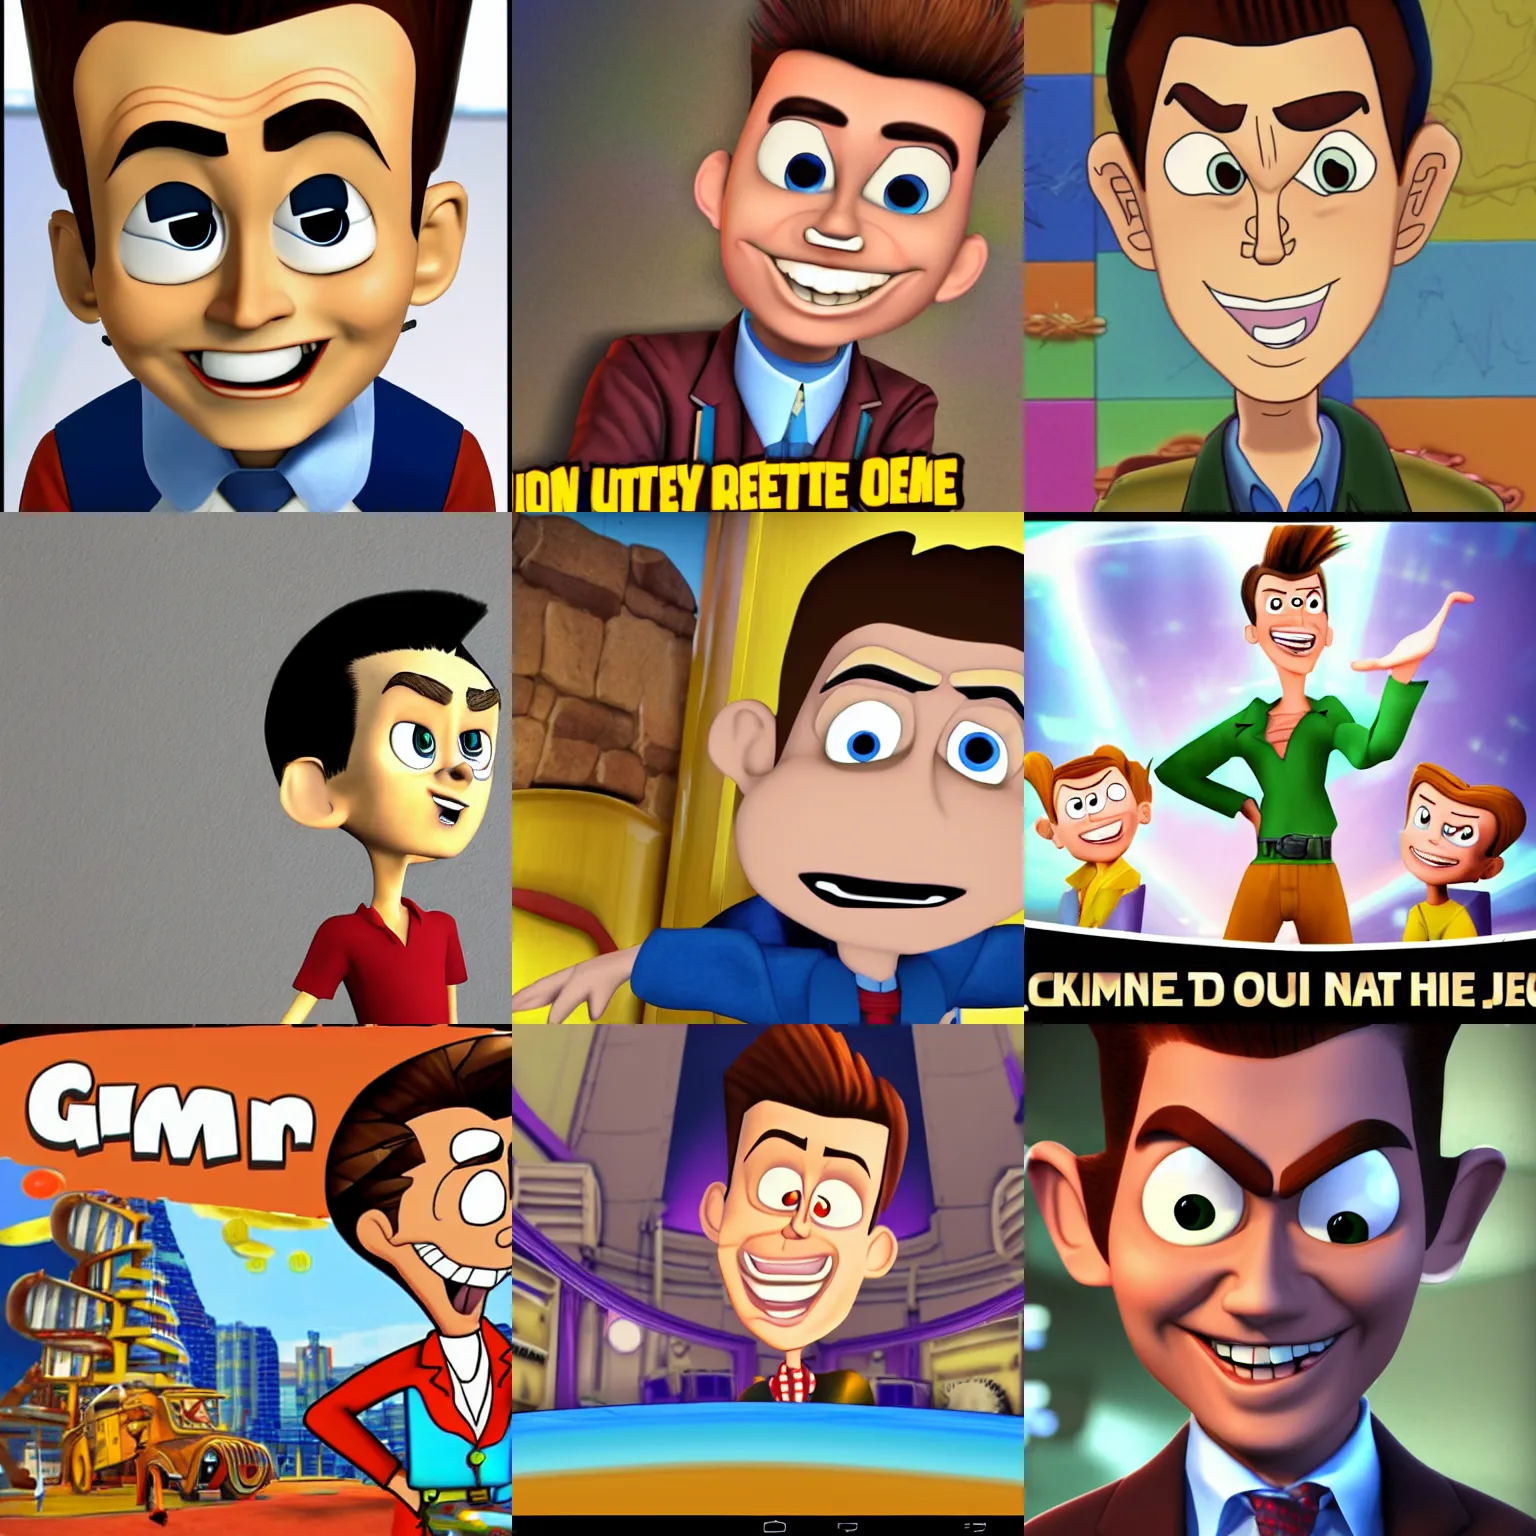 Prompt: g - man in the style of jimmy neutron, screenshot from jimmy neutron